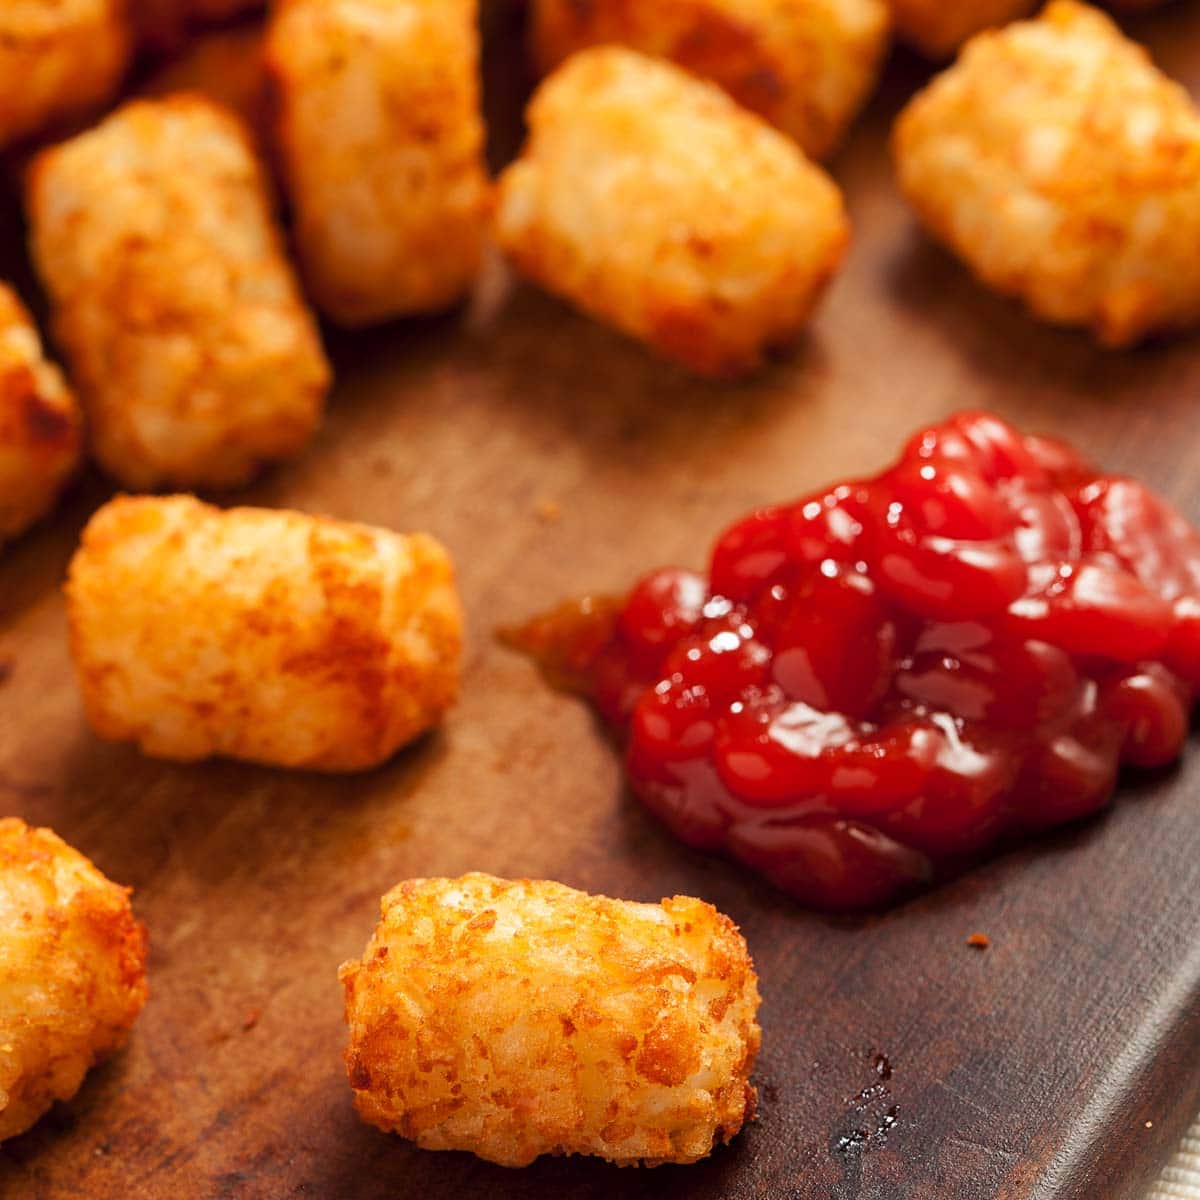 Tater tots meld together because of the combination of proteins and wet starches. When these two sticky ingredients increasingly touch each other, the sticker and chewier the tater tots become.